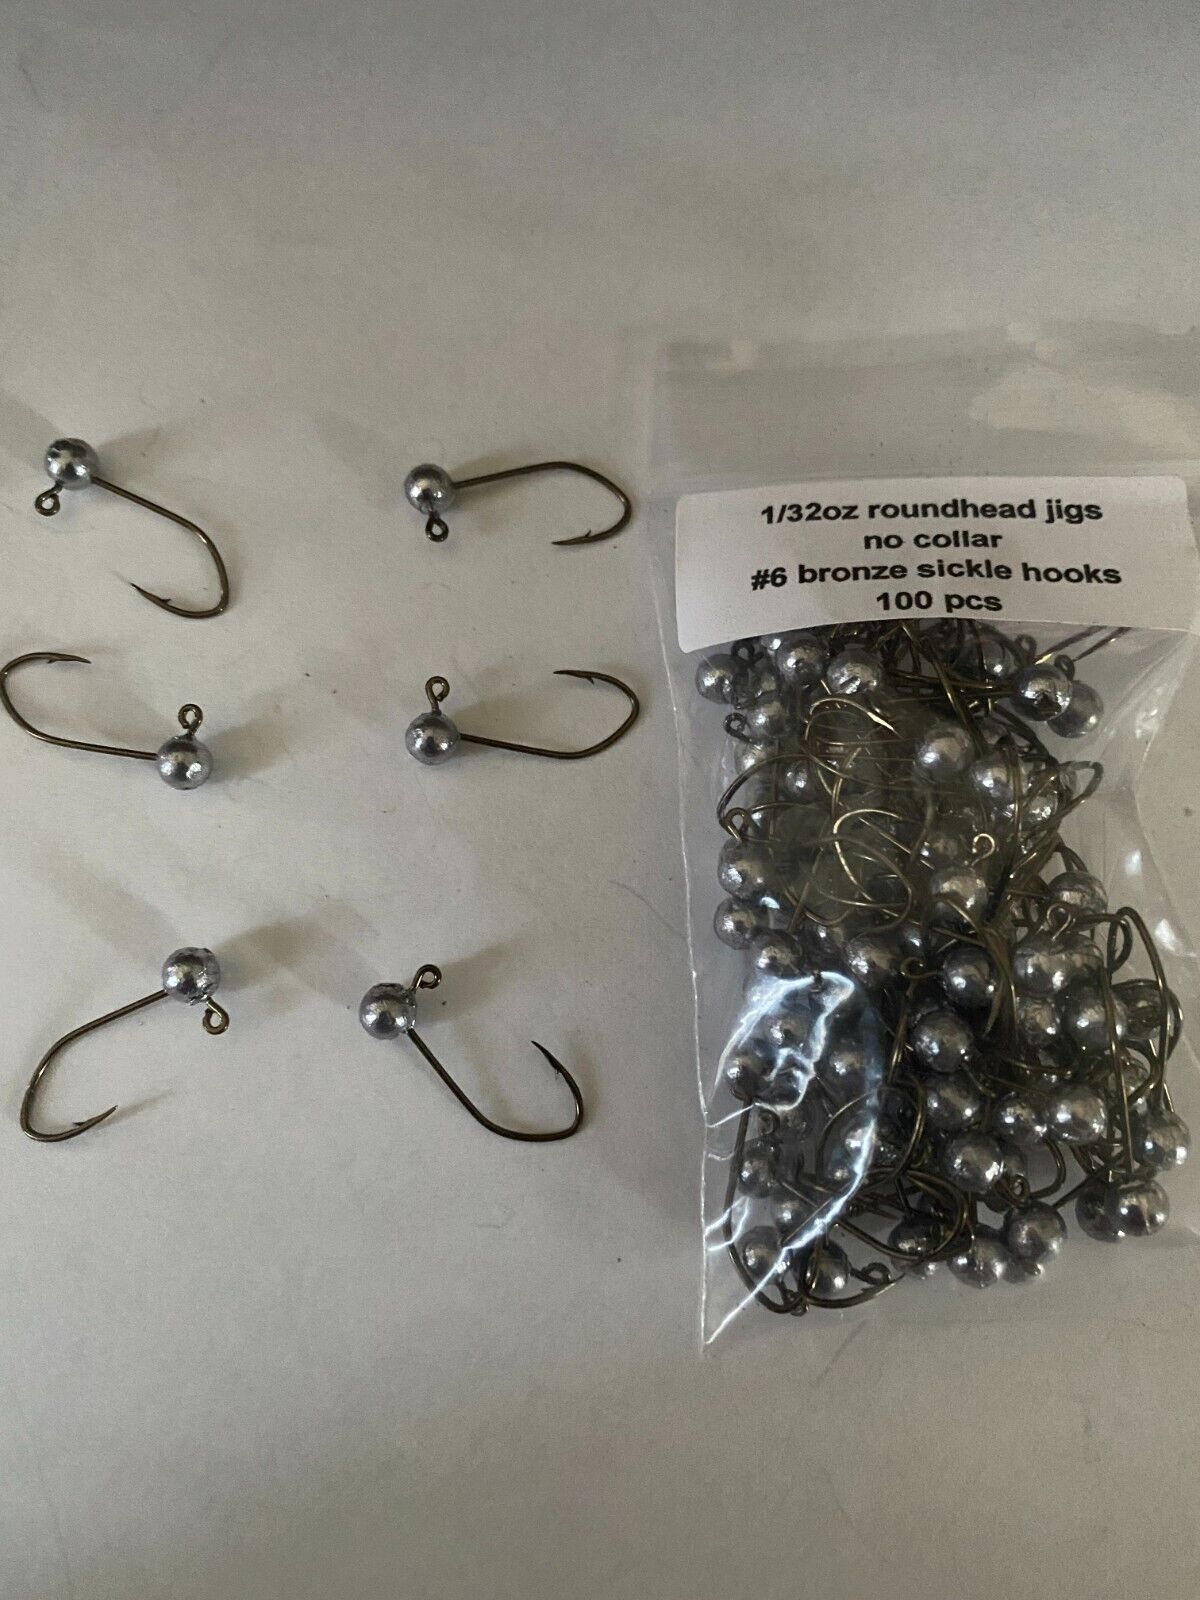 1/32oz Roundhead jig with no collar with #6 or #4 bronze sickle hooks – M &  C's Handcrafted Jigs & Lures